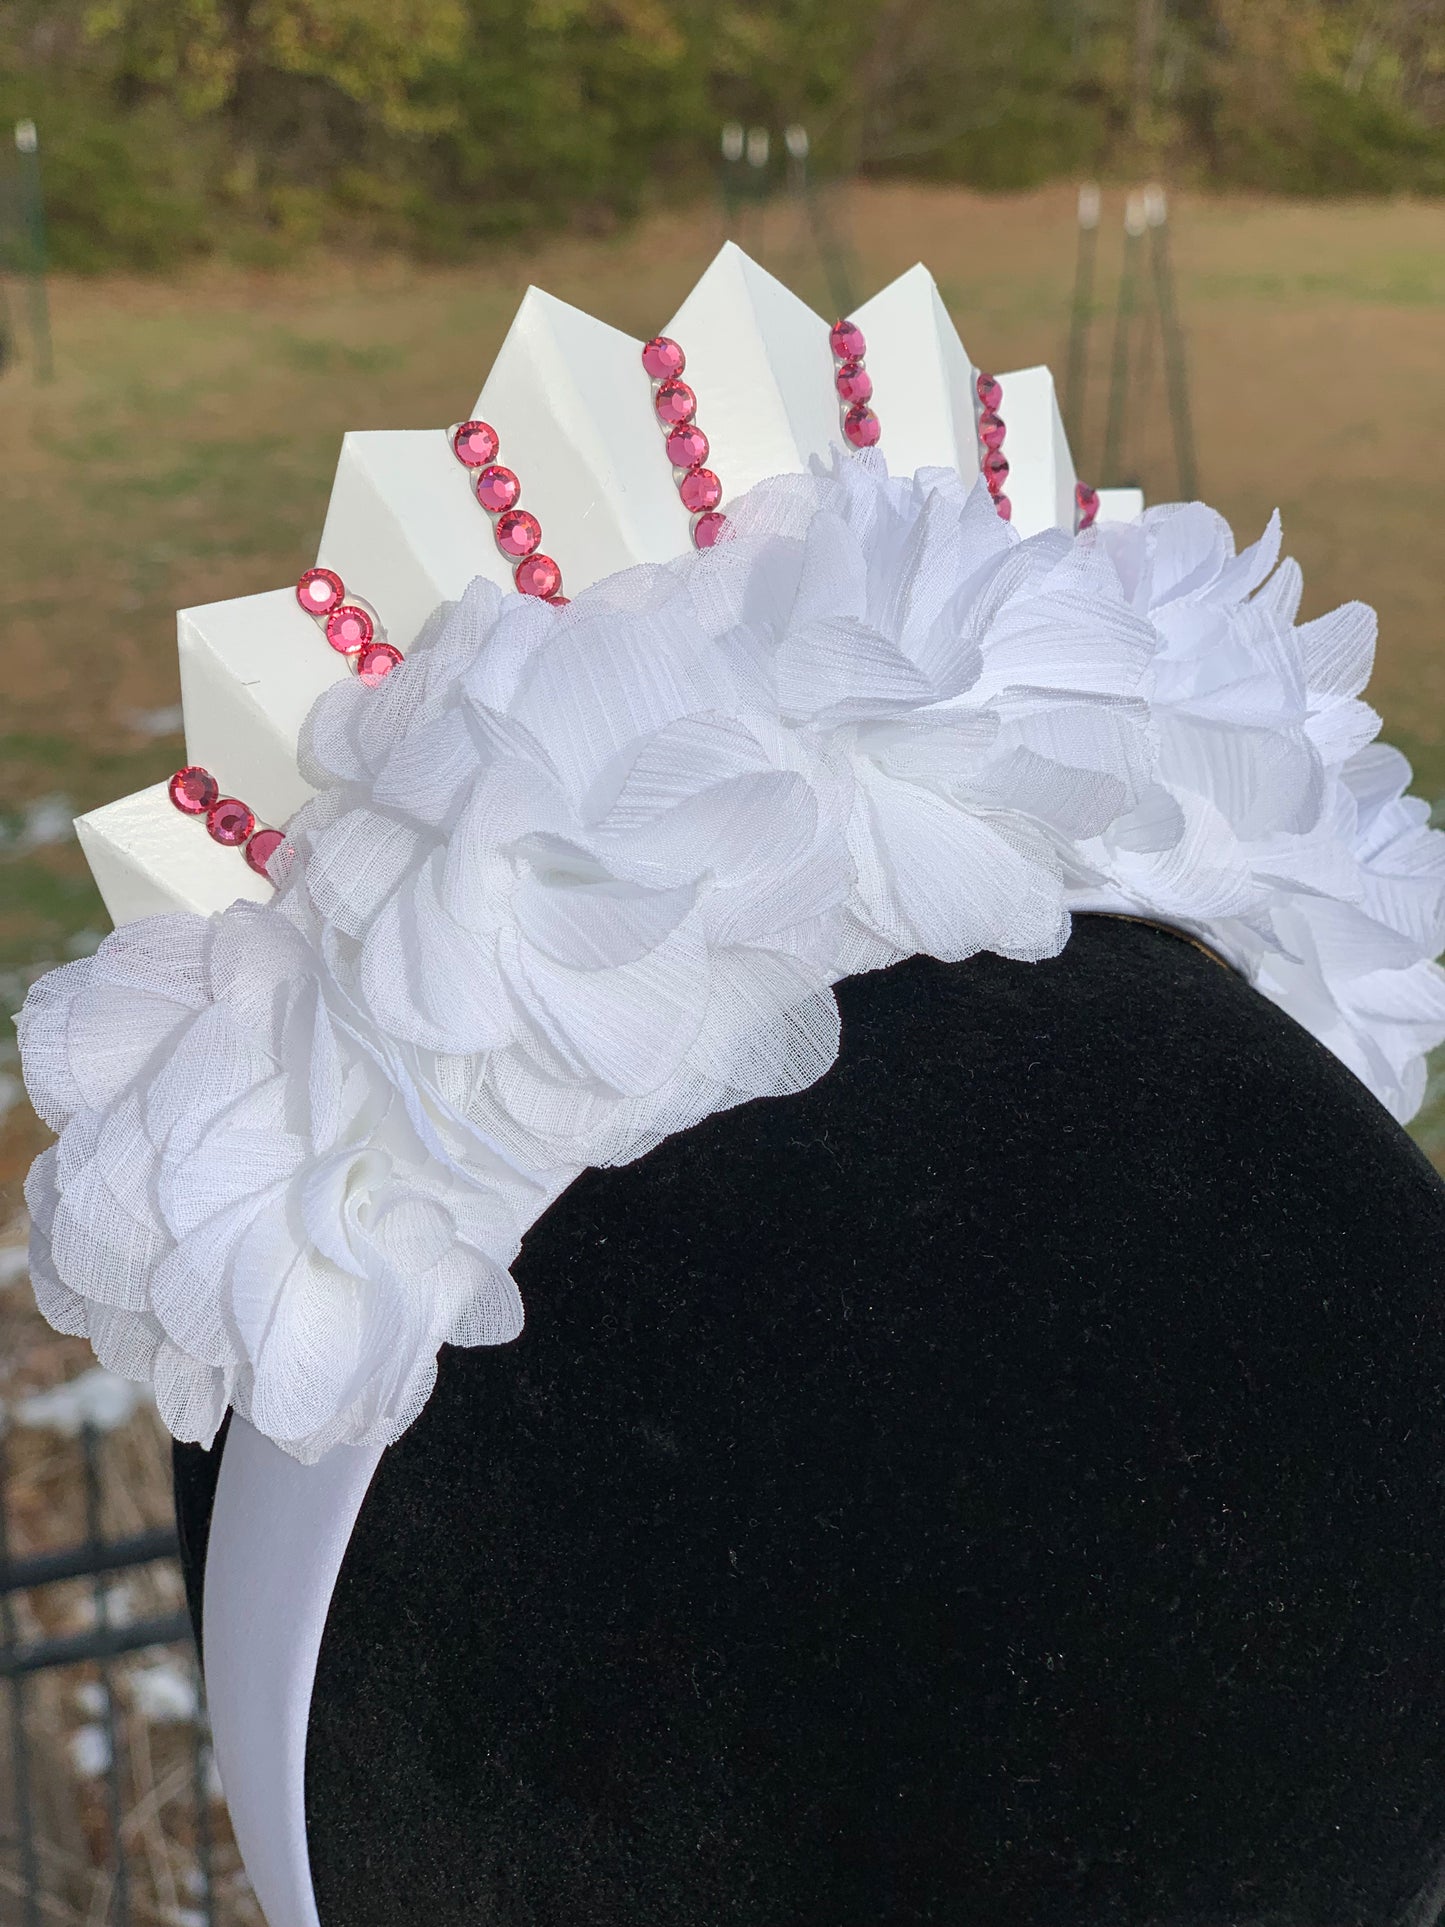 Fluffy Floral White Crown with Pink Rhinestones